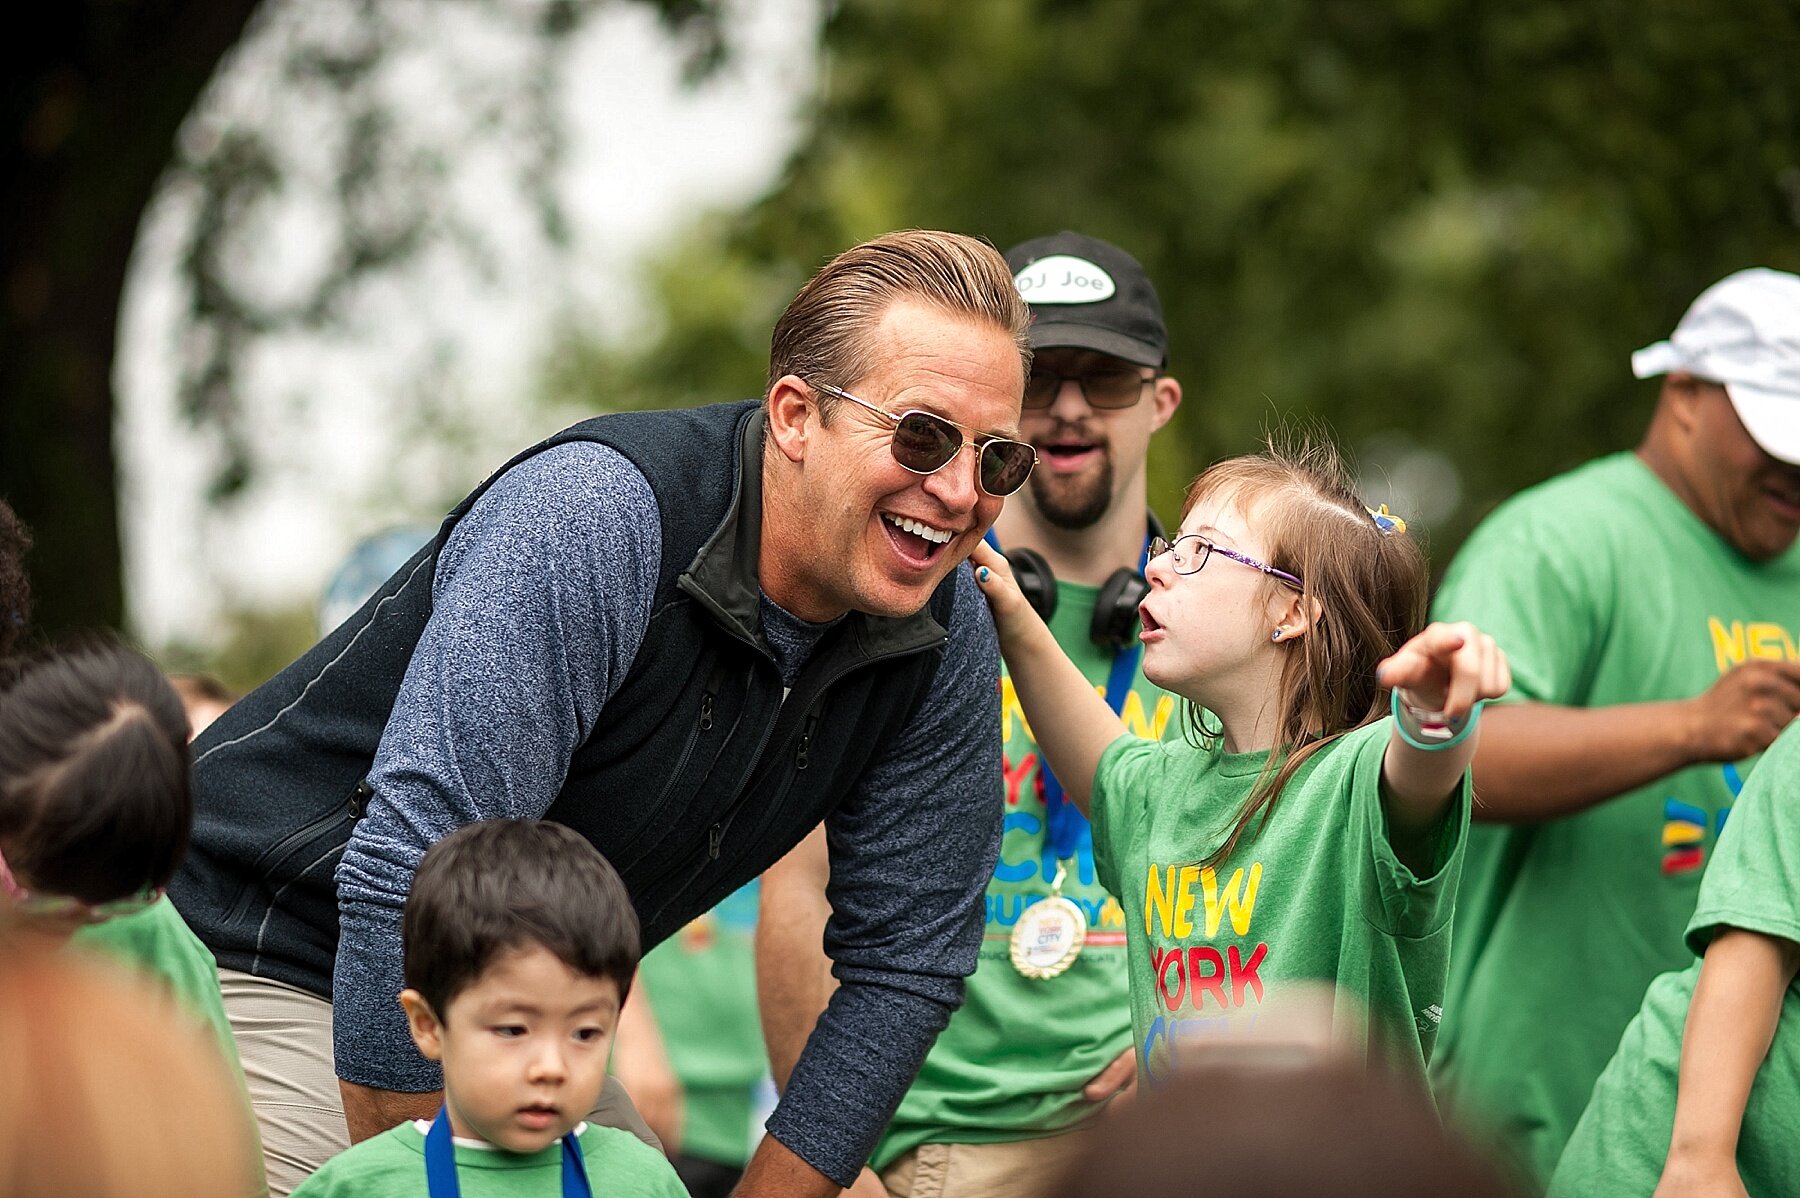 Wendy Zook Photography | NDSS Event, NDSS Event photographer, Buddy Walk NYC 2019, New York City Buddy Walk, Down Syndrome awareness, Down syndrome awareness event, DS event